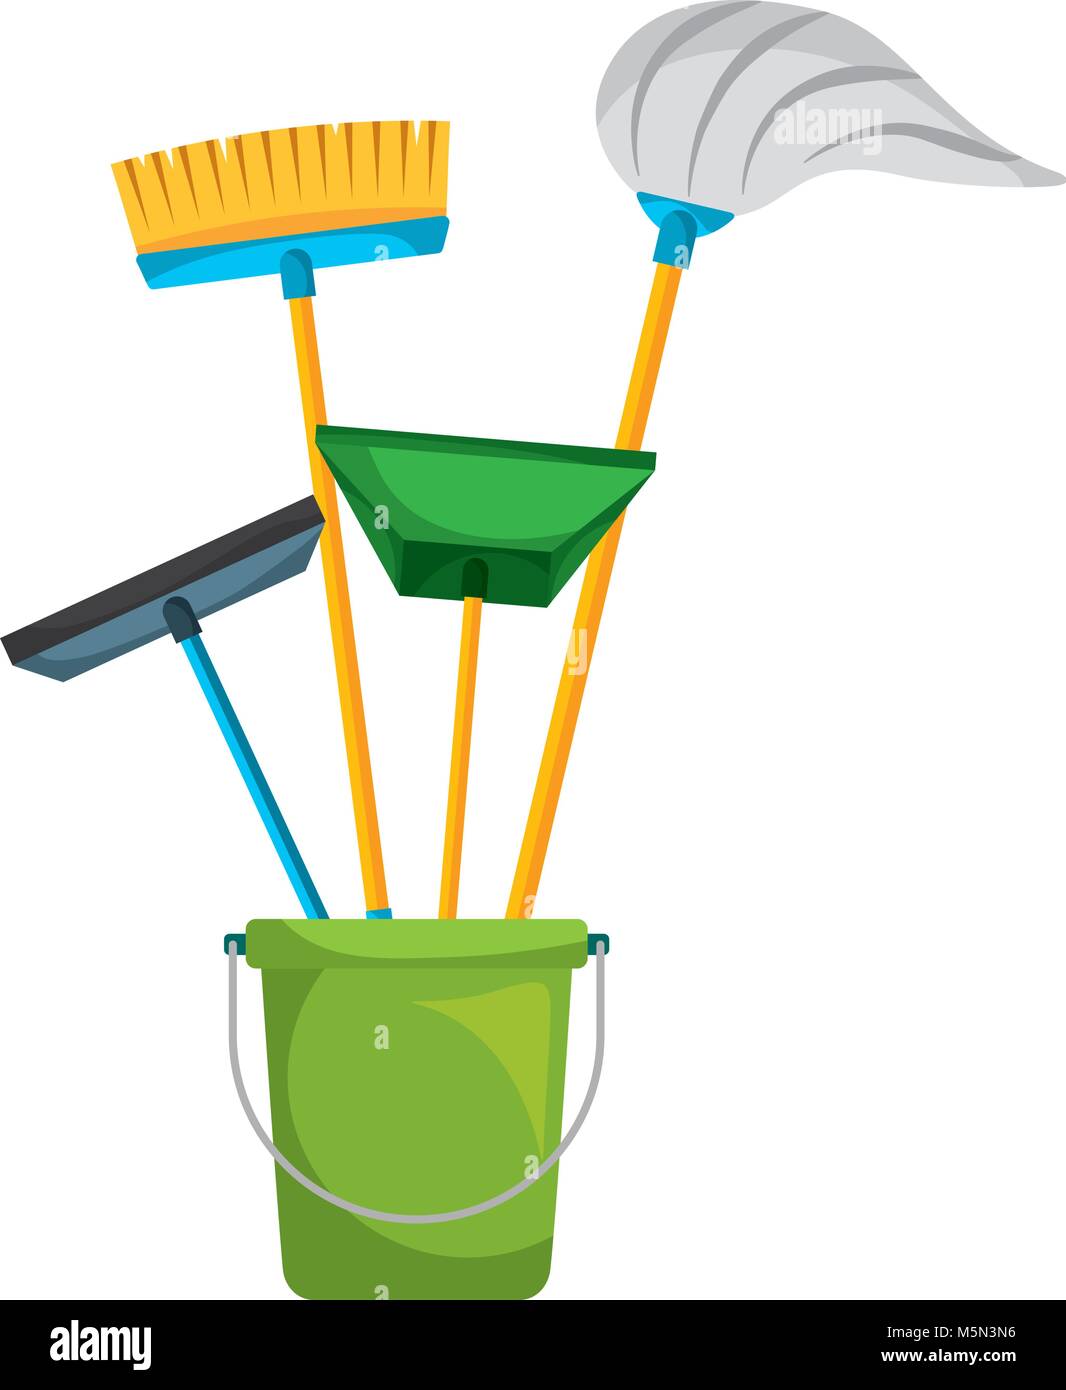 cleaning objects plastic bucket full of janitor cleaning helpful Stock Vector